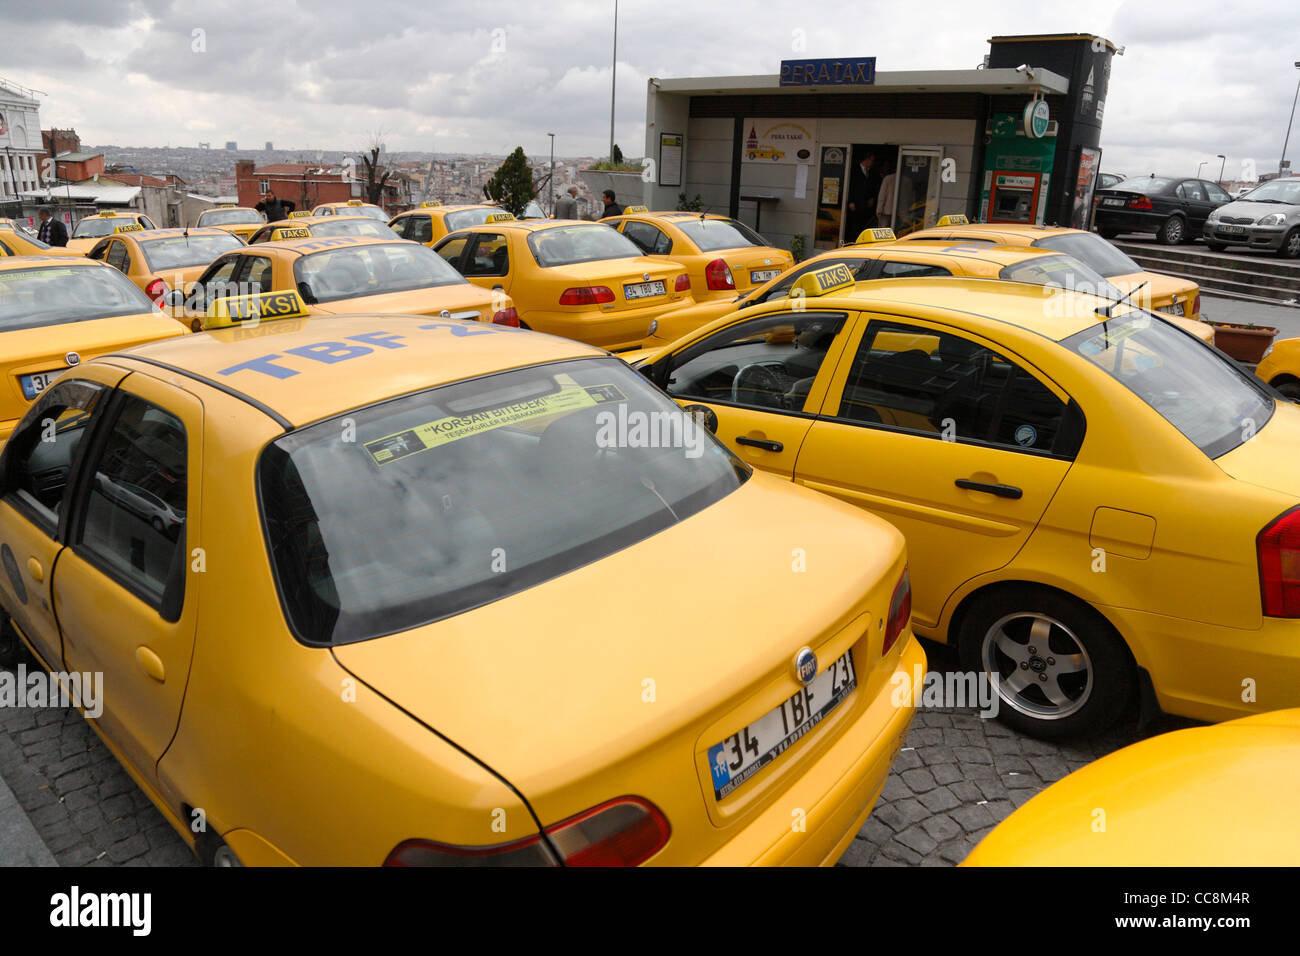 Taxi rank in the Galata shopping district Yellow cabs waiting for trade in turkey taksi Stock Photo